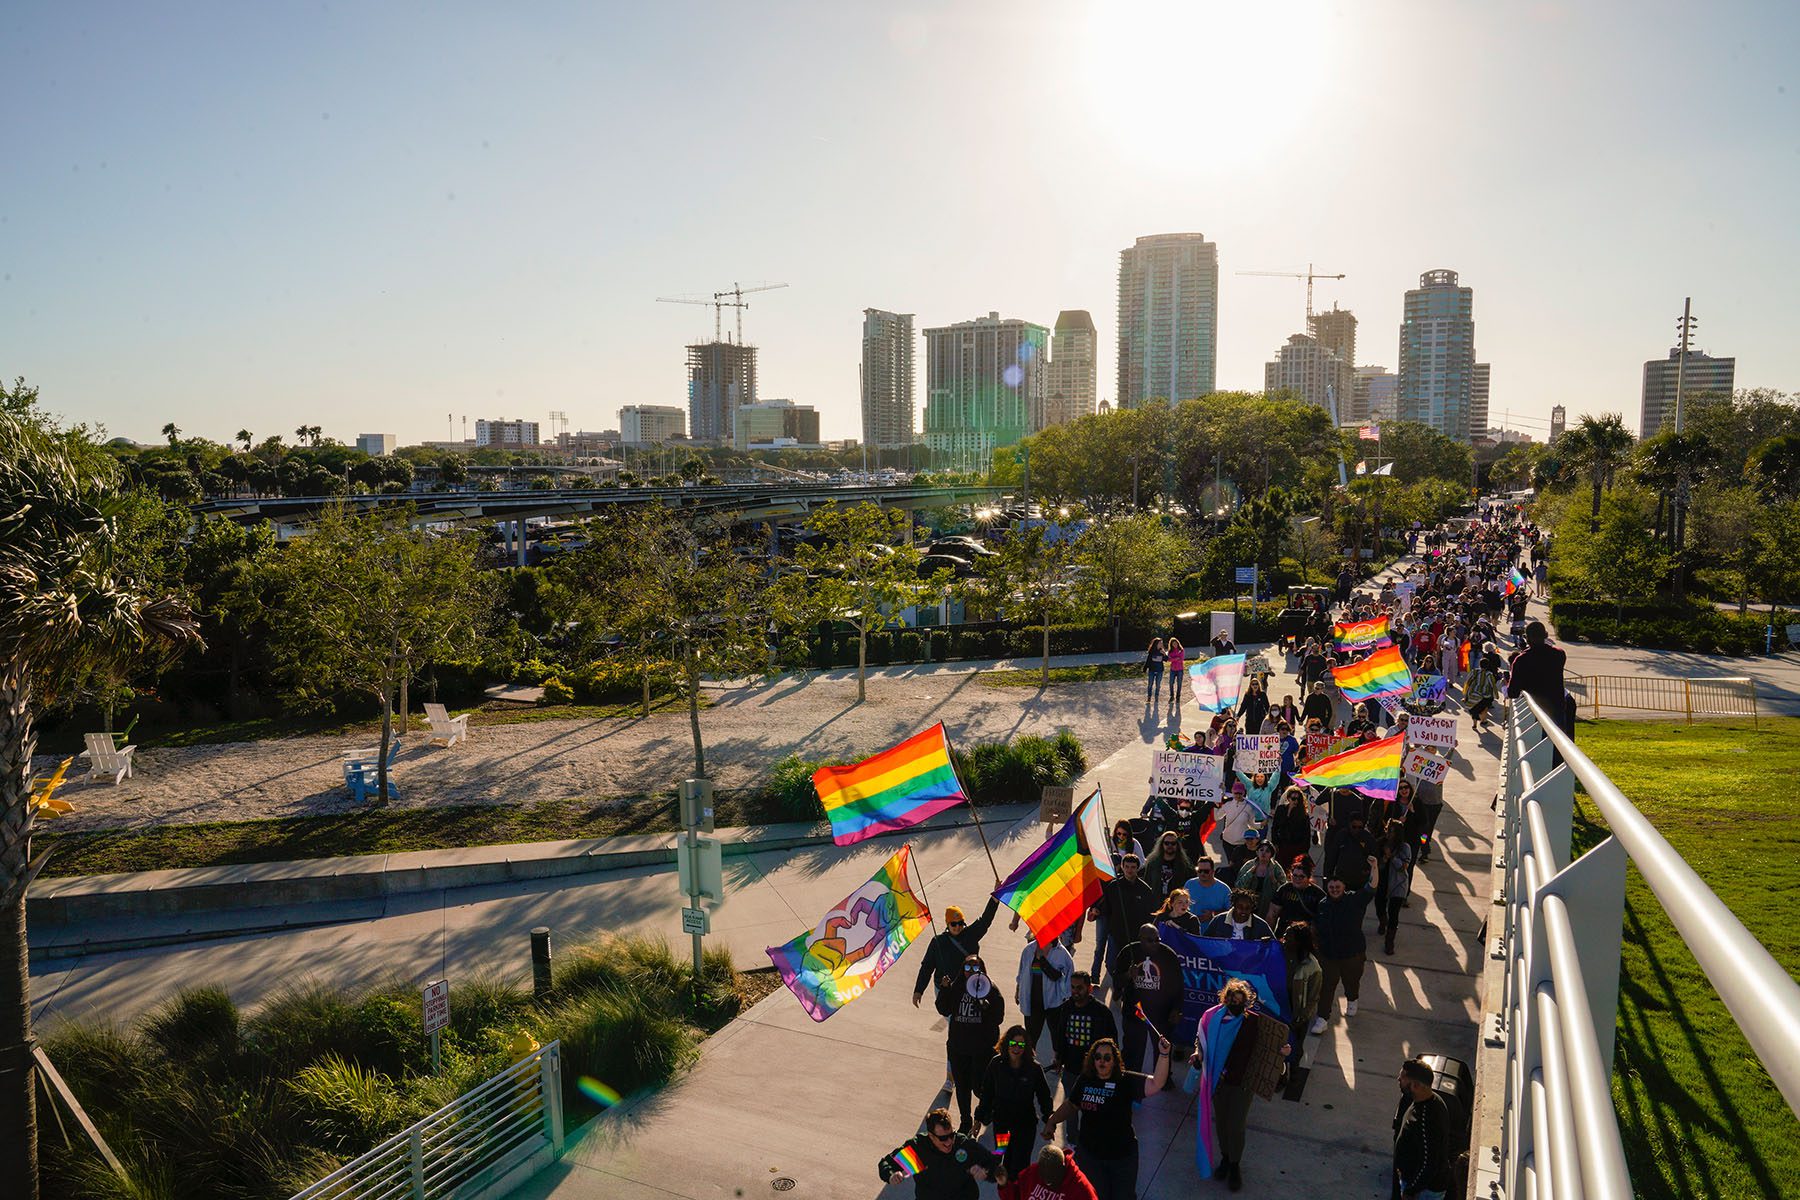 Demonstrators wave pride flags as they march across a bridge in protest of Florida's "Don't Say Gay" bill in St. Petersburg, Florida.